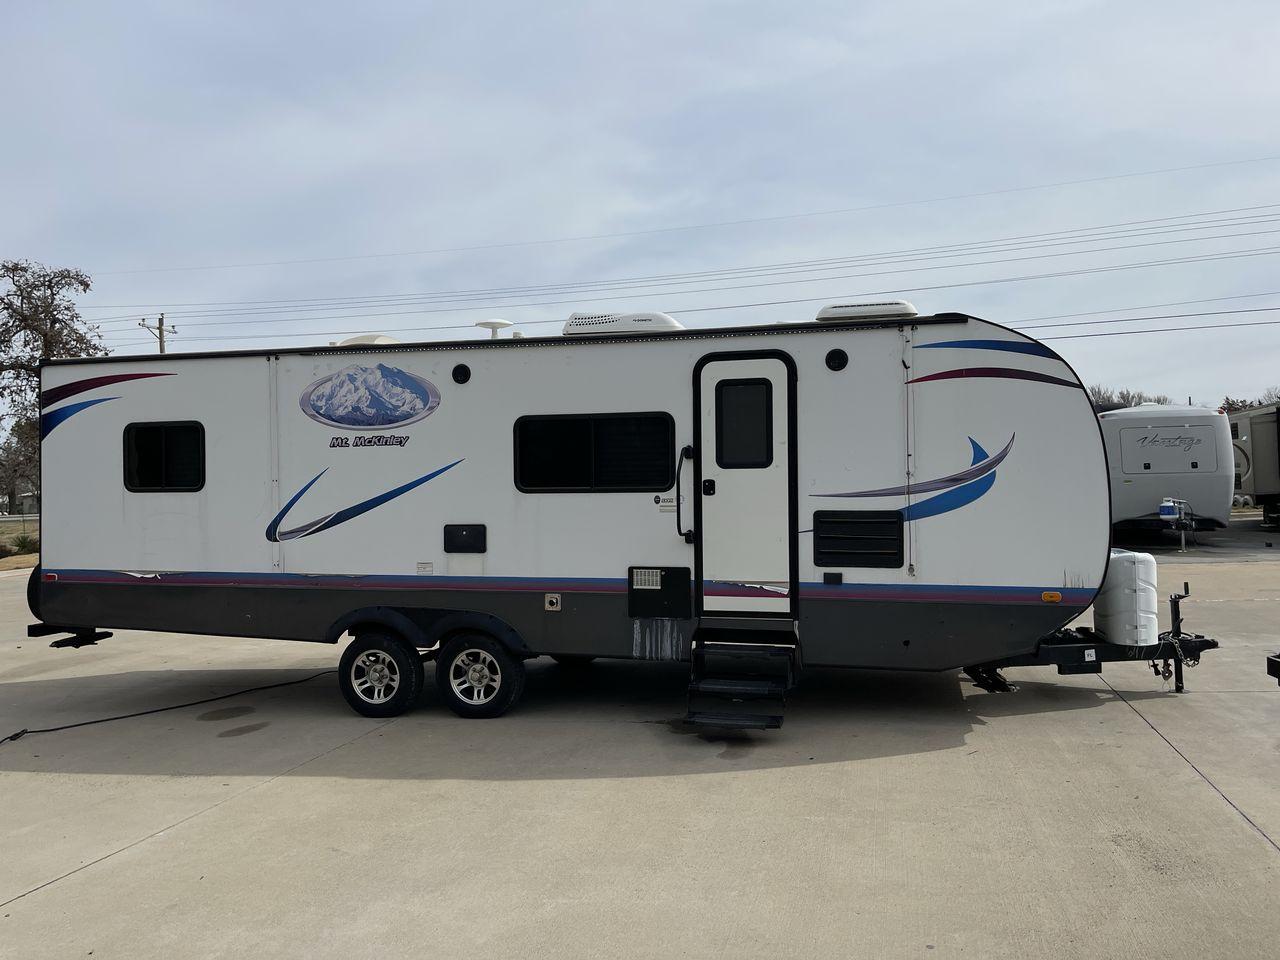 2018 WHITE MT MCKINLEY 830FK (59CCC3221JL) , Length: 32 ft | Dry Weight: 5,660 lbs. | Slides: 1 transmission, located at 4319 N Main Street, Cleburne, TX, 76033, (817) 221-0660, 32.435829, -97.384178 - Take the 2018 Mt. McKinley 830FK Travel Trailer on your upcoming journey. This travel trailer provides a well-thought-out living area for your outdoor adventures, all while being tailored for comfort and convenience. This unit measures 32 ft in length by 8 ft in width. It has a dry weight of 5,66 - Photo #22